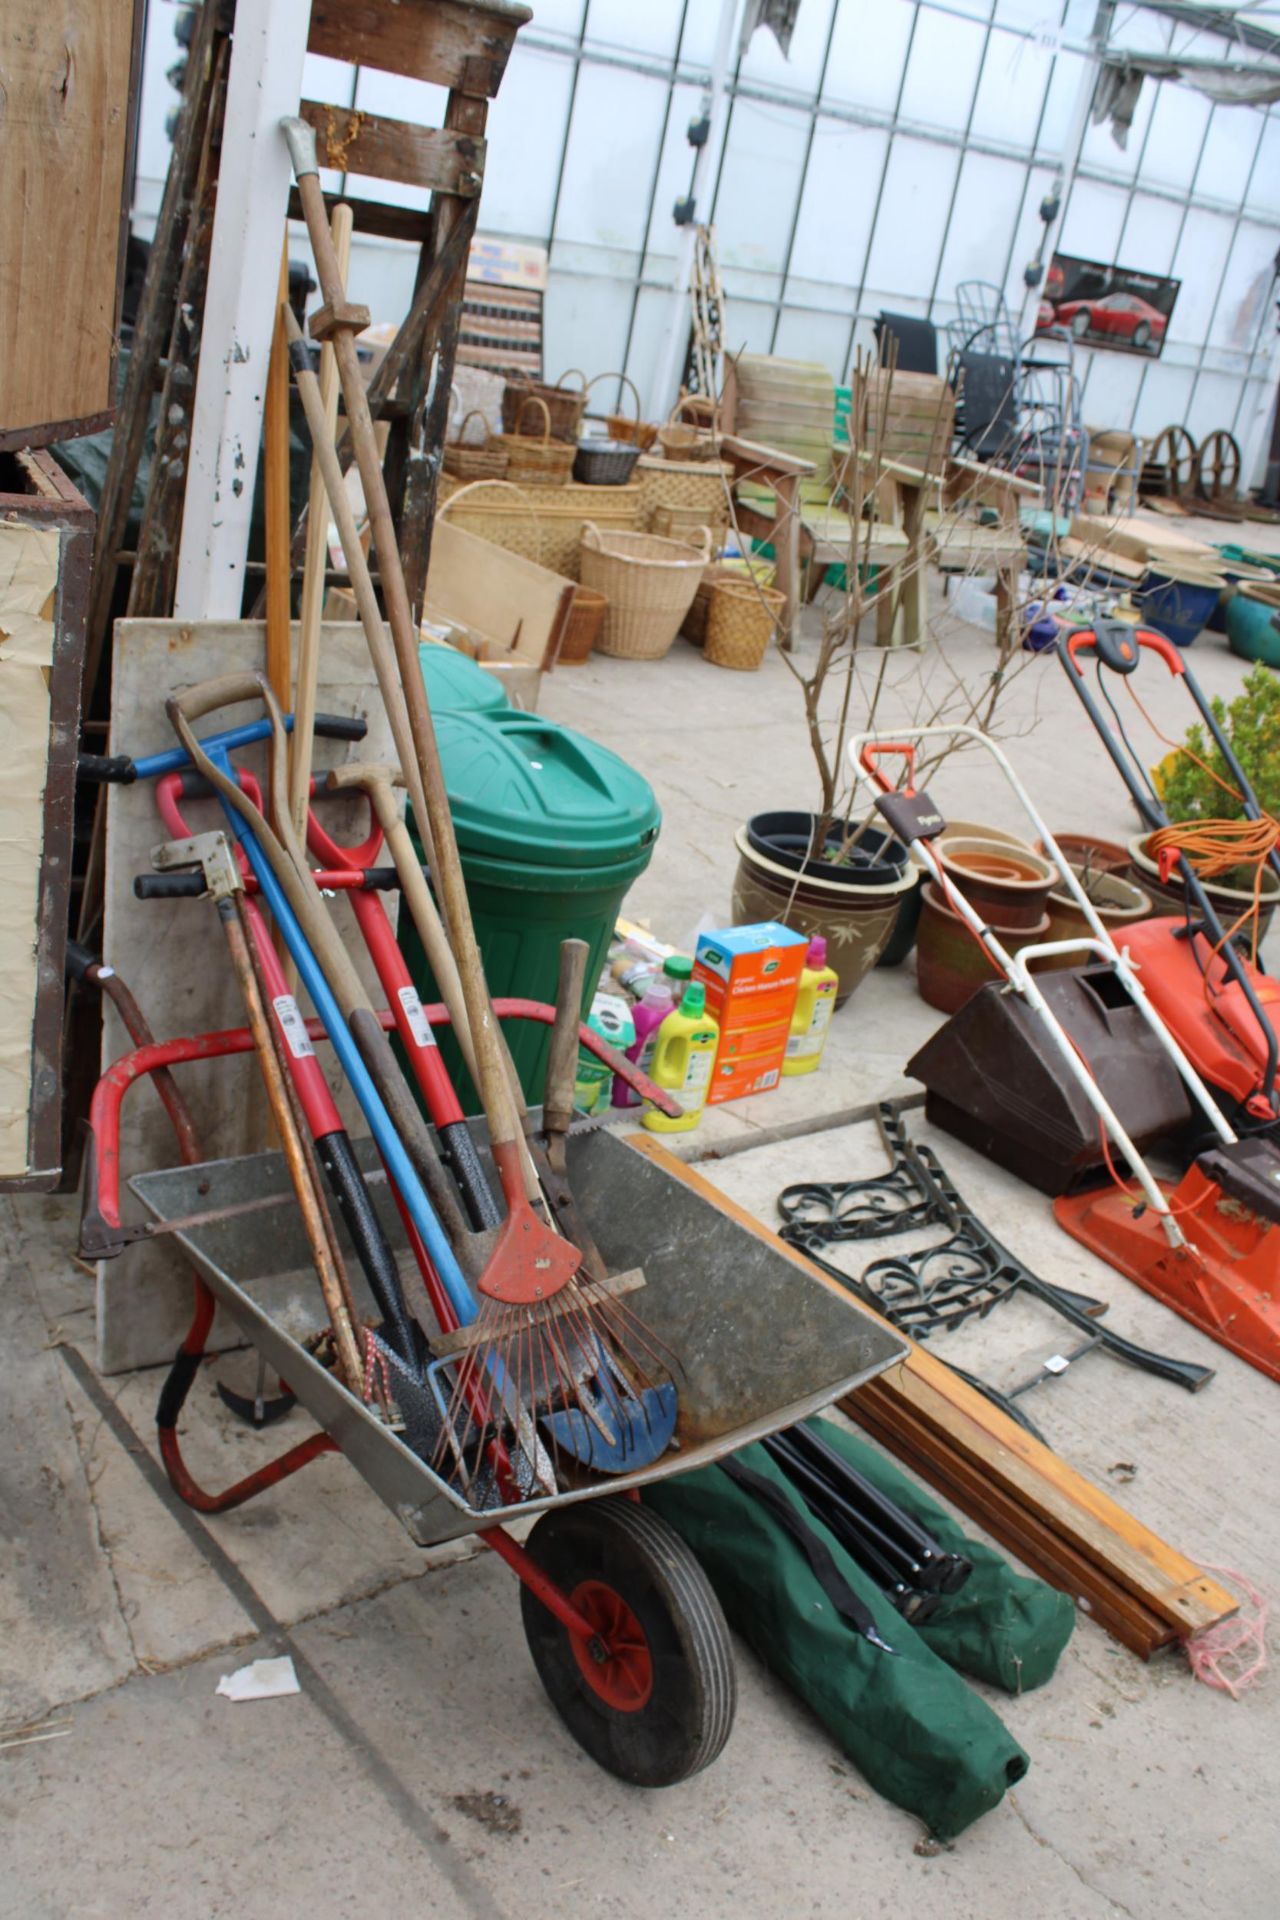 A METAL WHEEL BARROW, AN ASSORTMENT OF GARDEN TOOLS AND A PIECE OF MARBLE